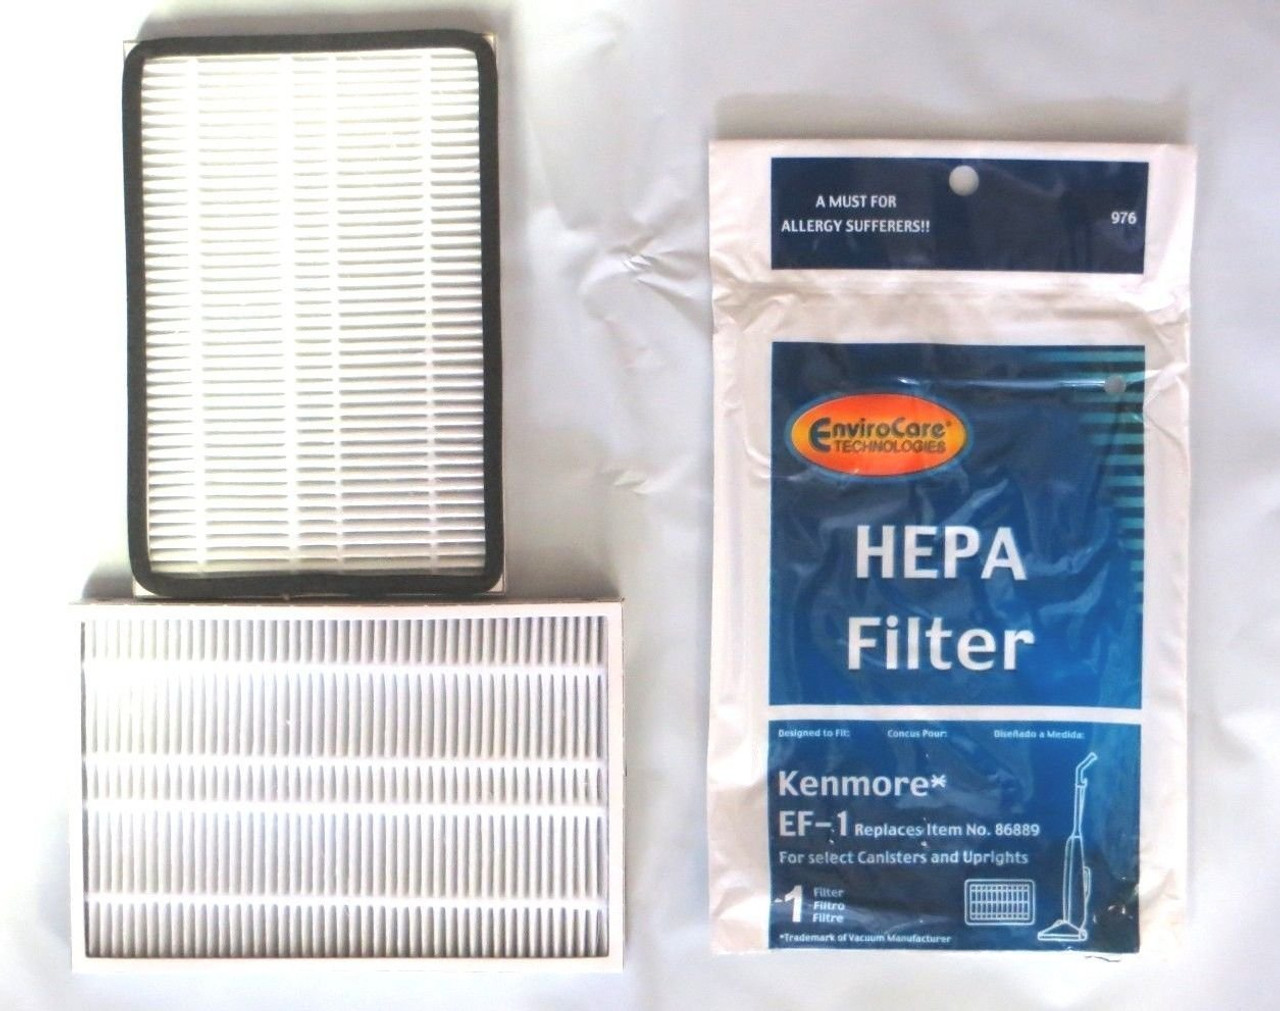 Black & Decker VF96 DustBuster Replacement Filter for Model